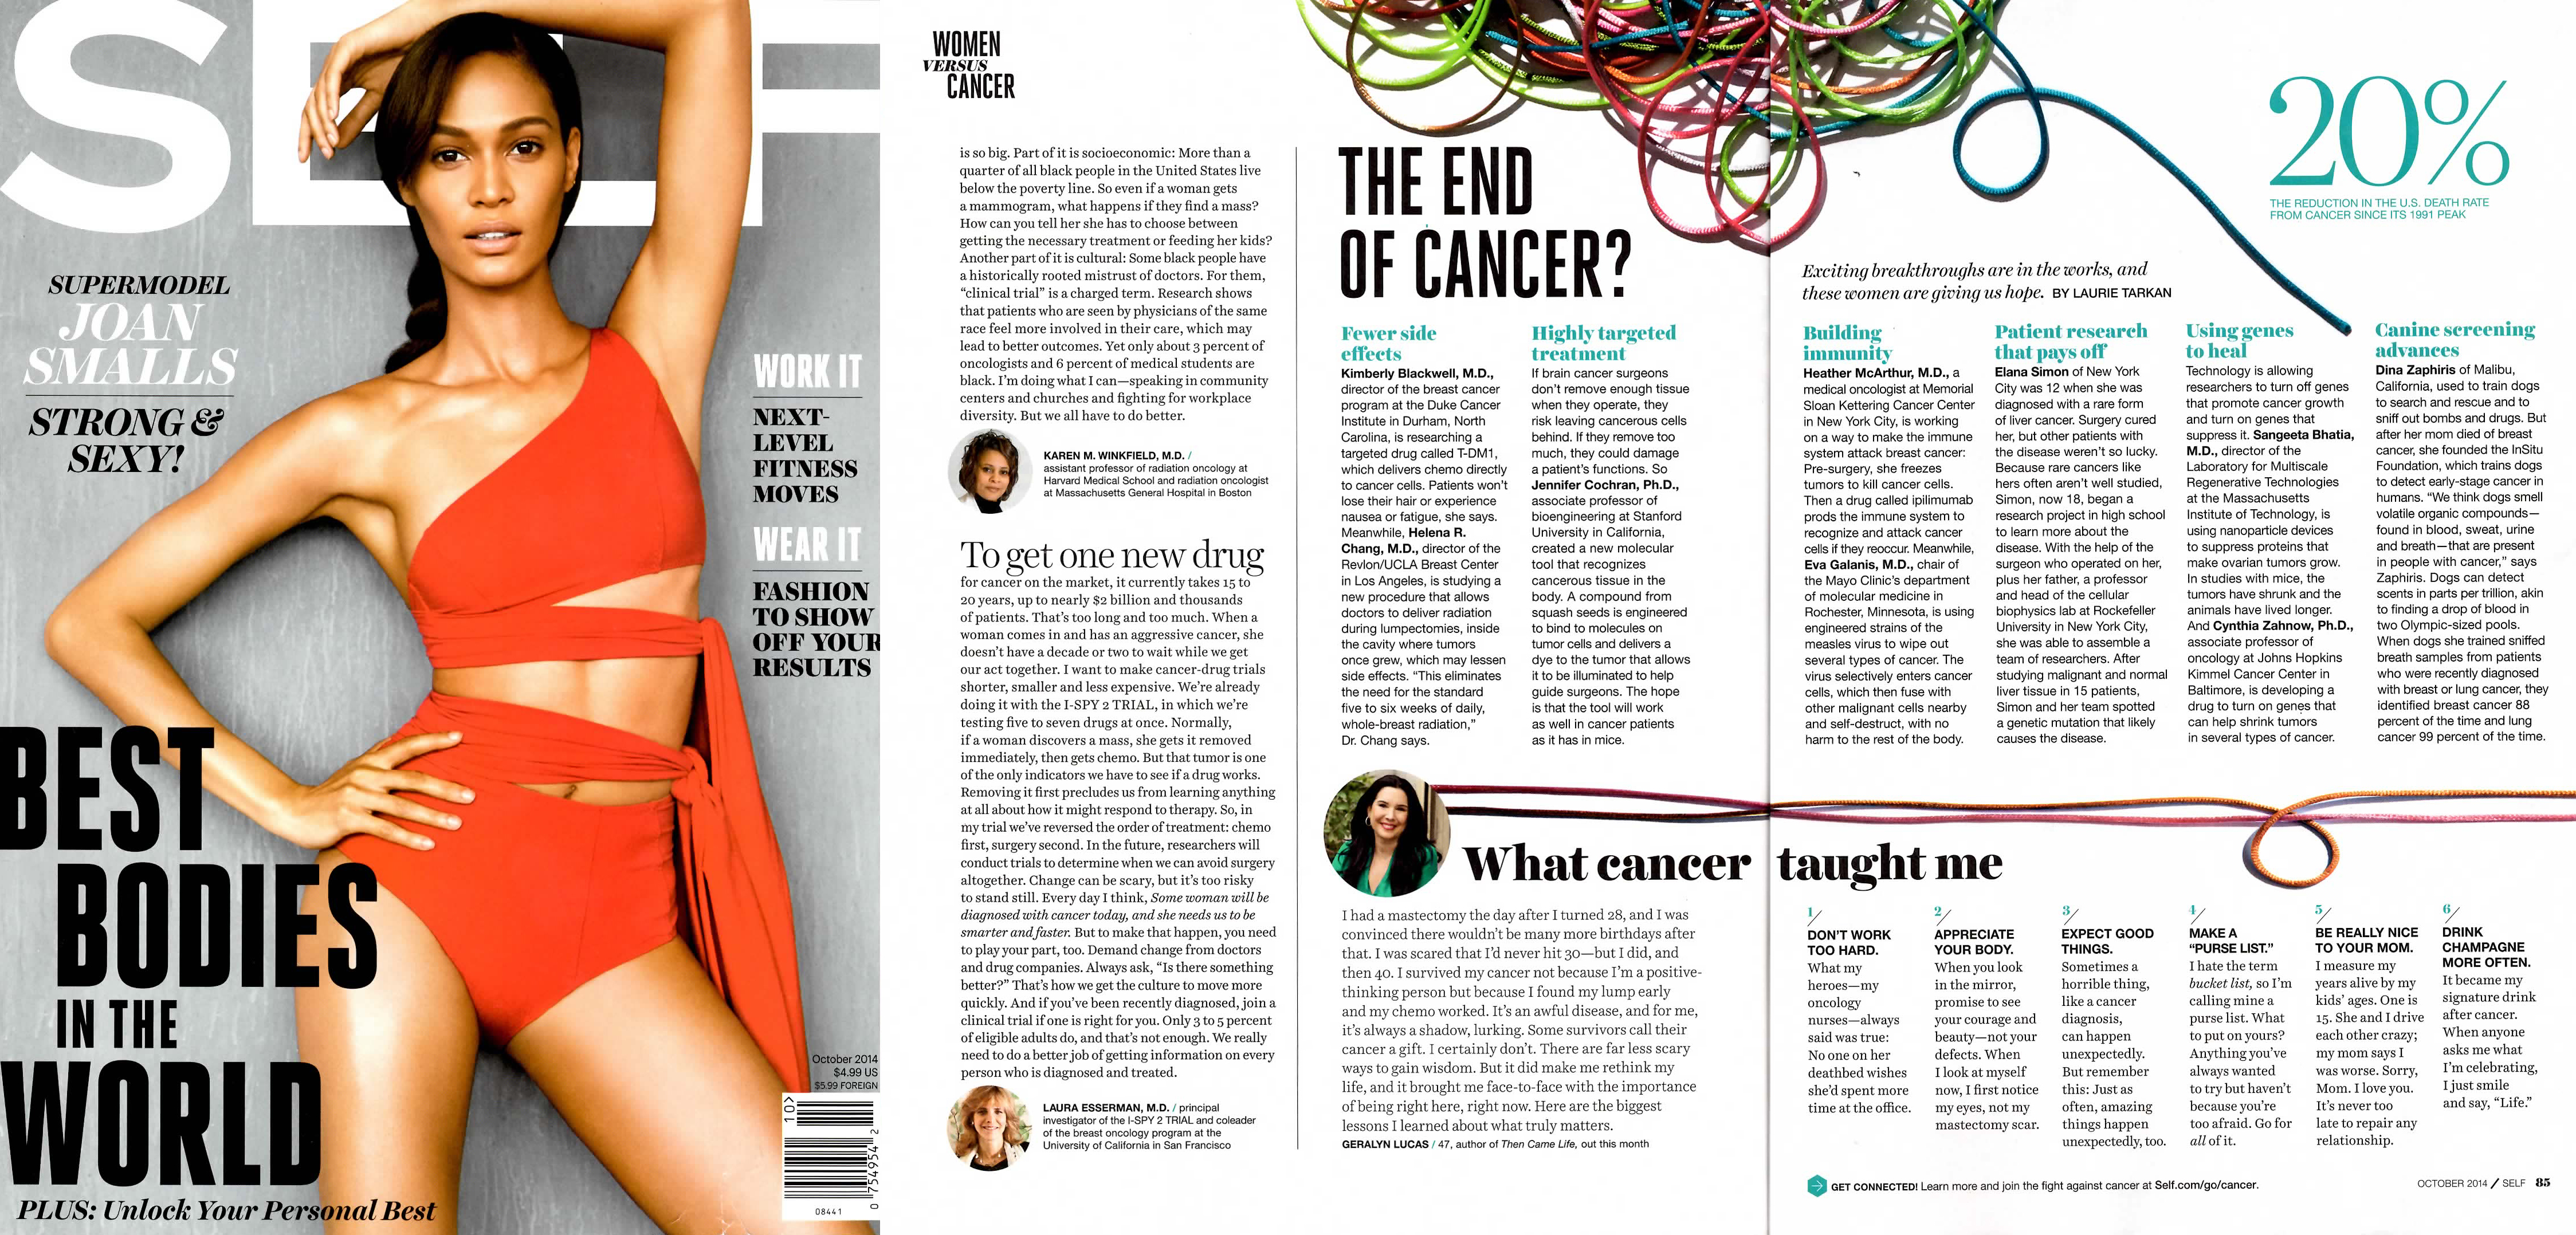 Self Magazine Oct 2014: The End of Cancer?